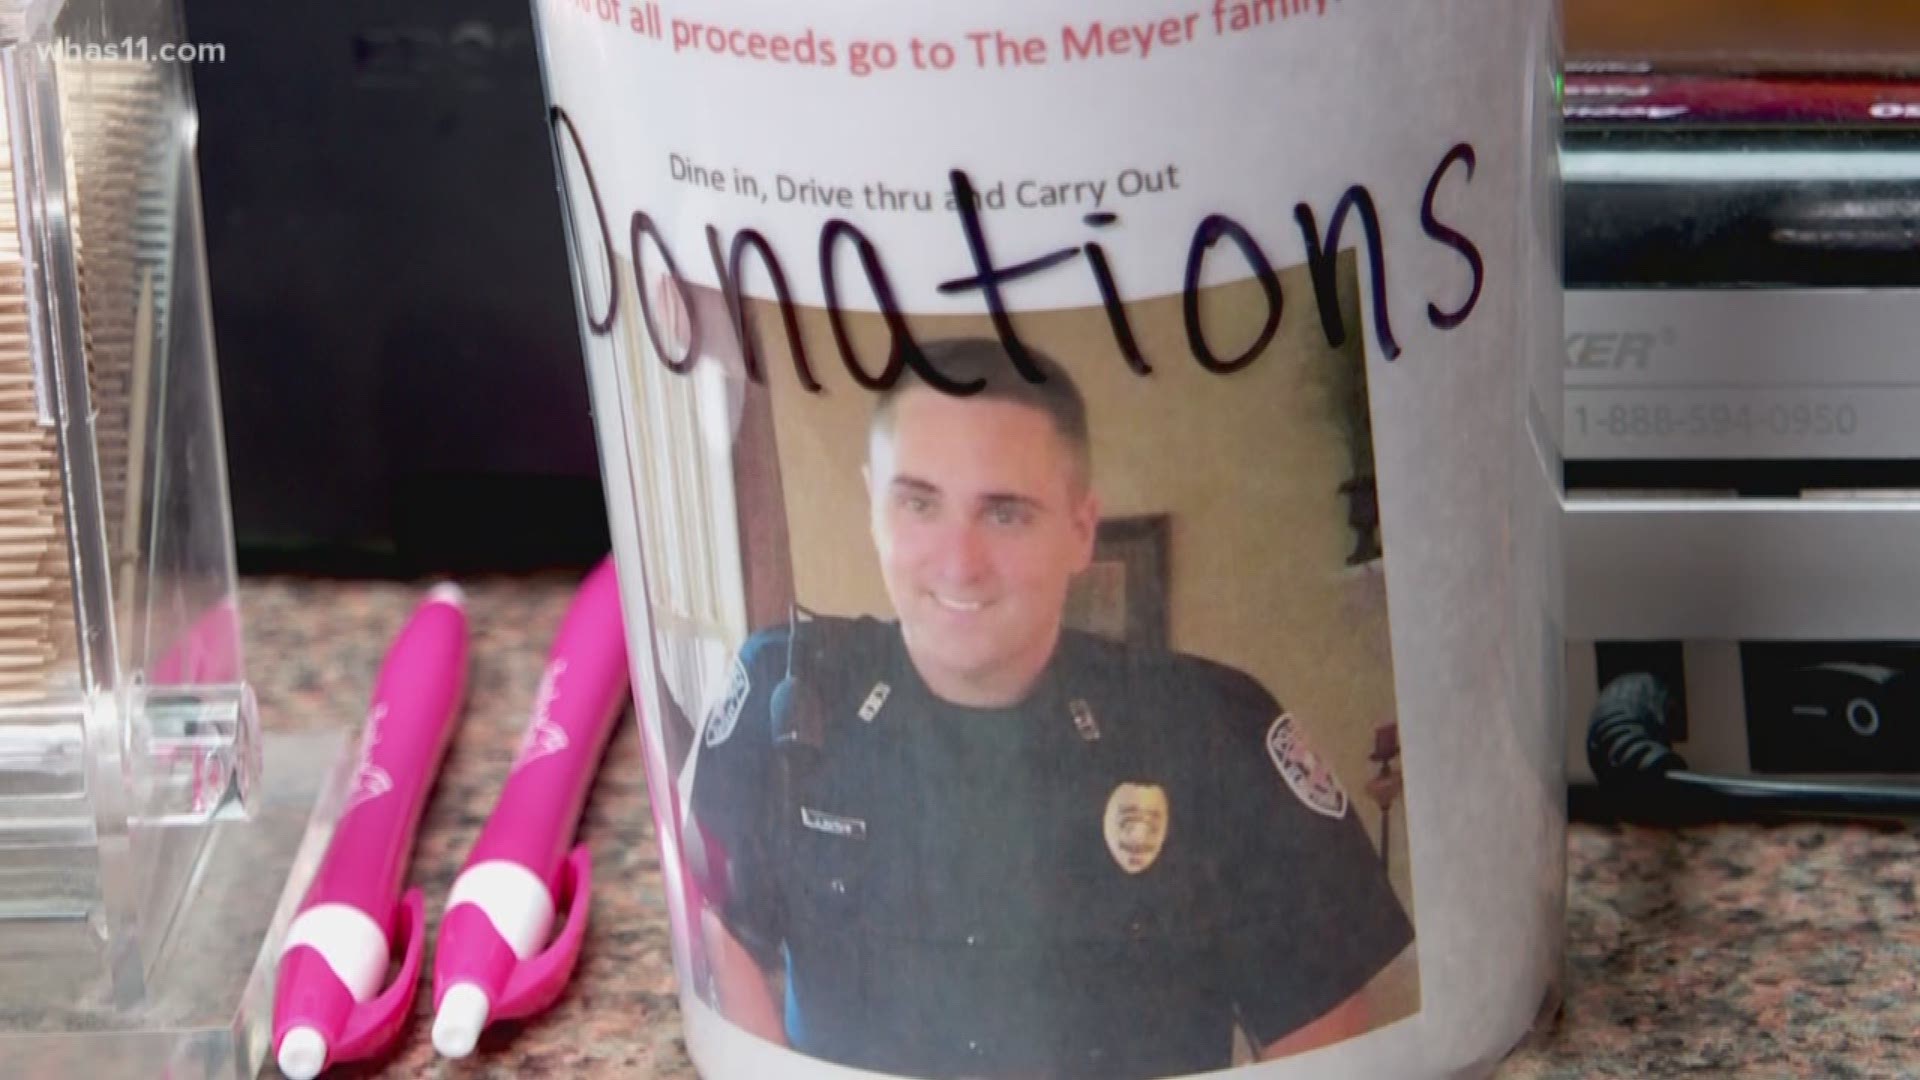 A week after a St. Matthews police detective is laid to rest, the community is now working on taking care of his family. Dennis Ting spoke with a local restaurant getting ready for a fundraiser.